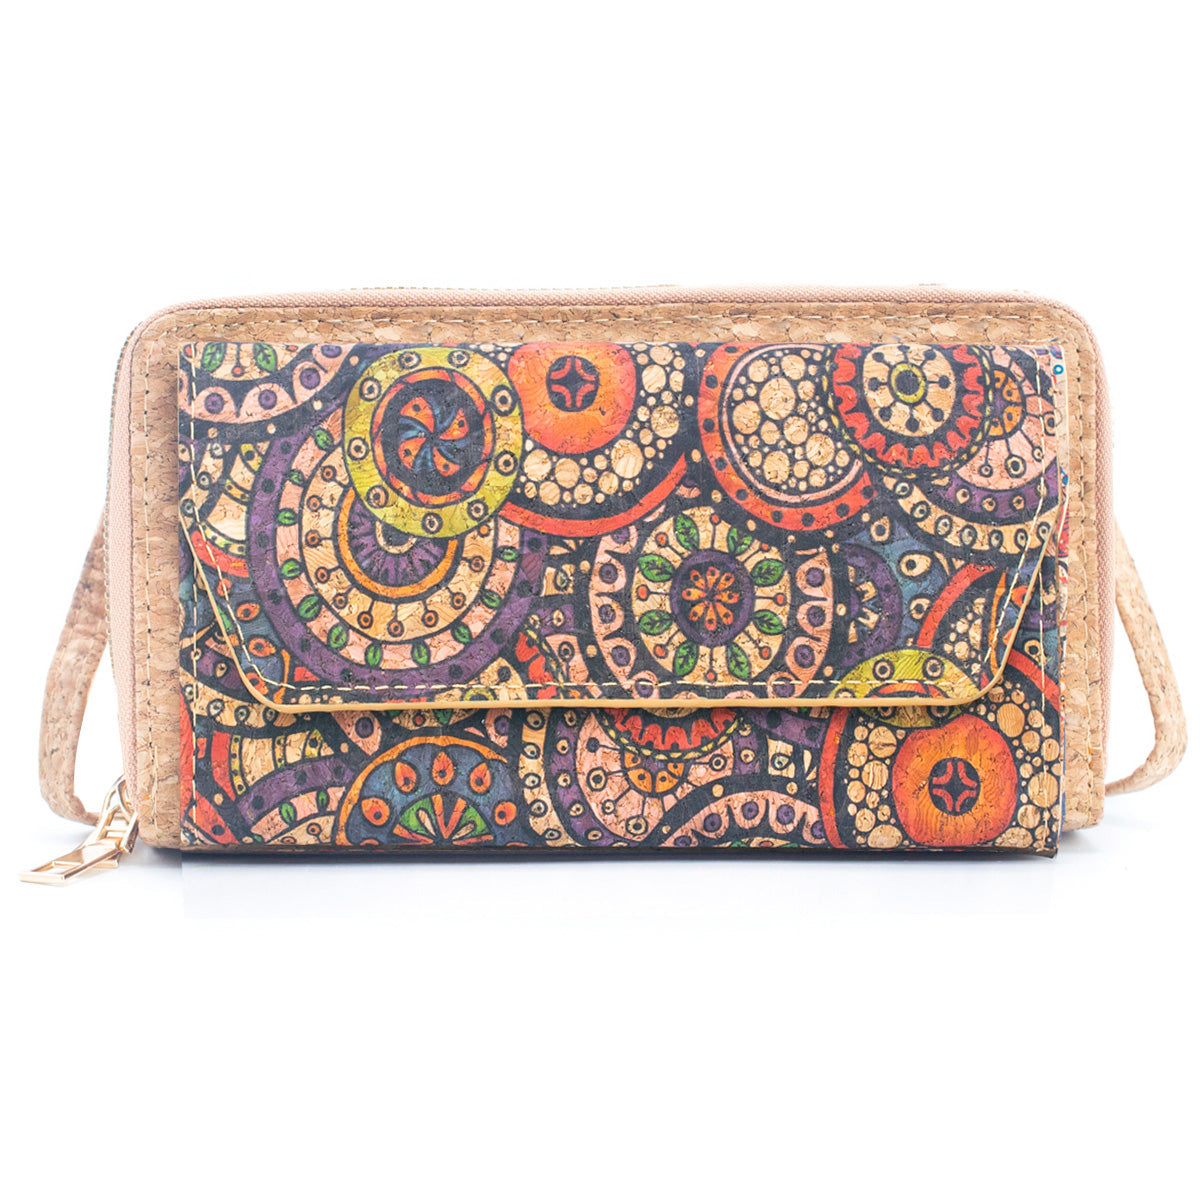 Cork Crafted Floral Print Women's Phone Pouch | THE CORK COLLECTION